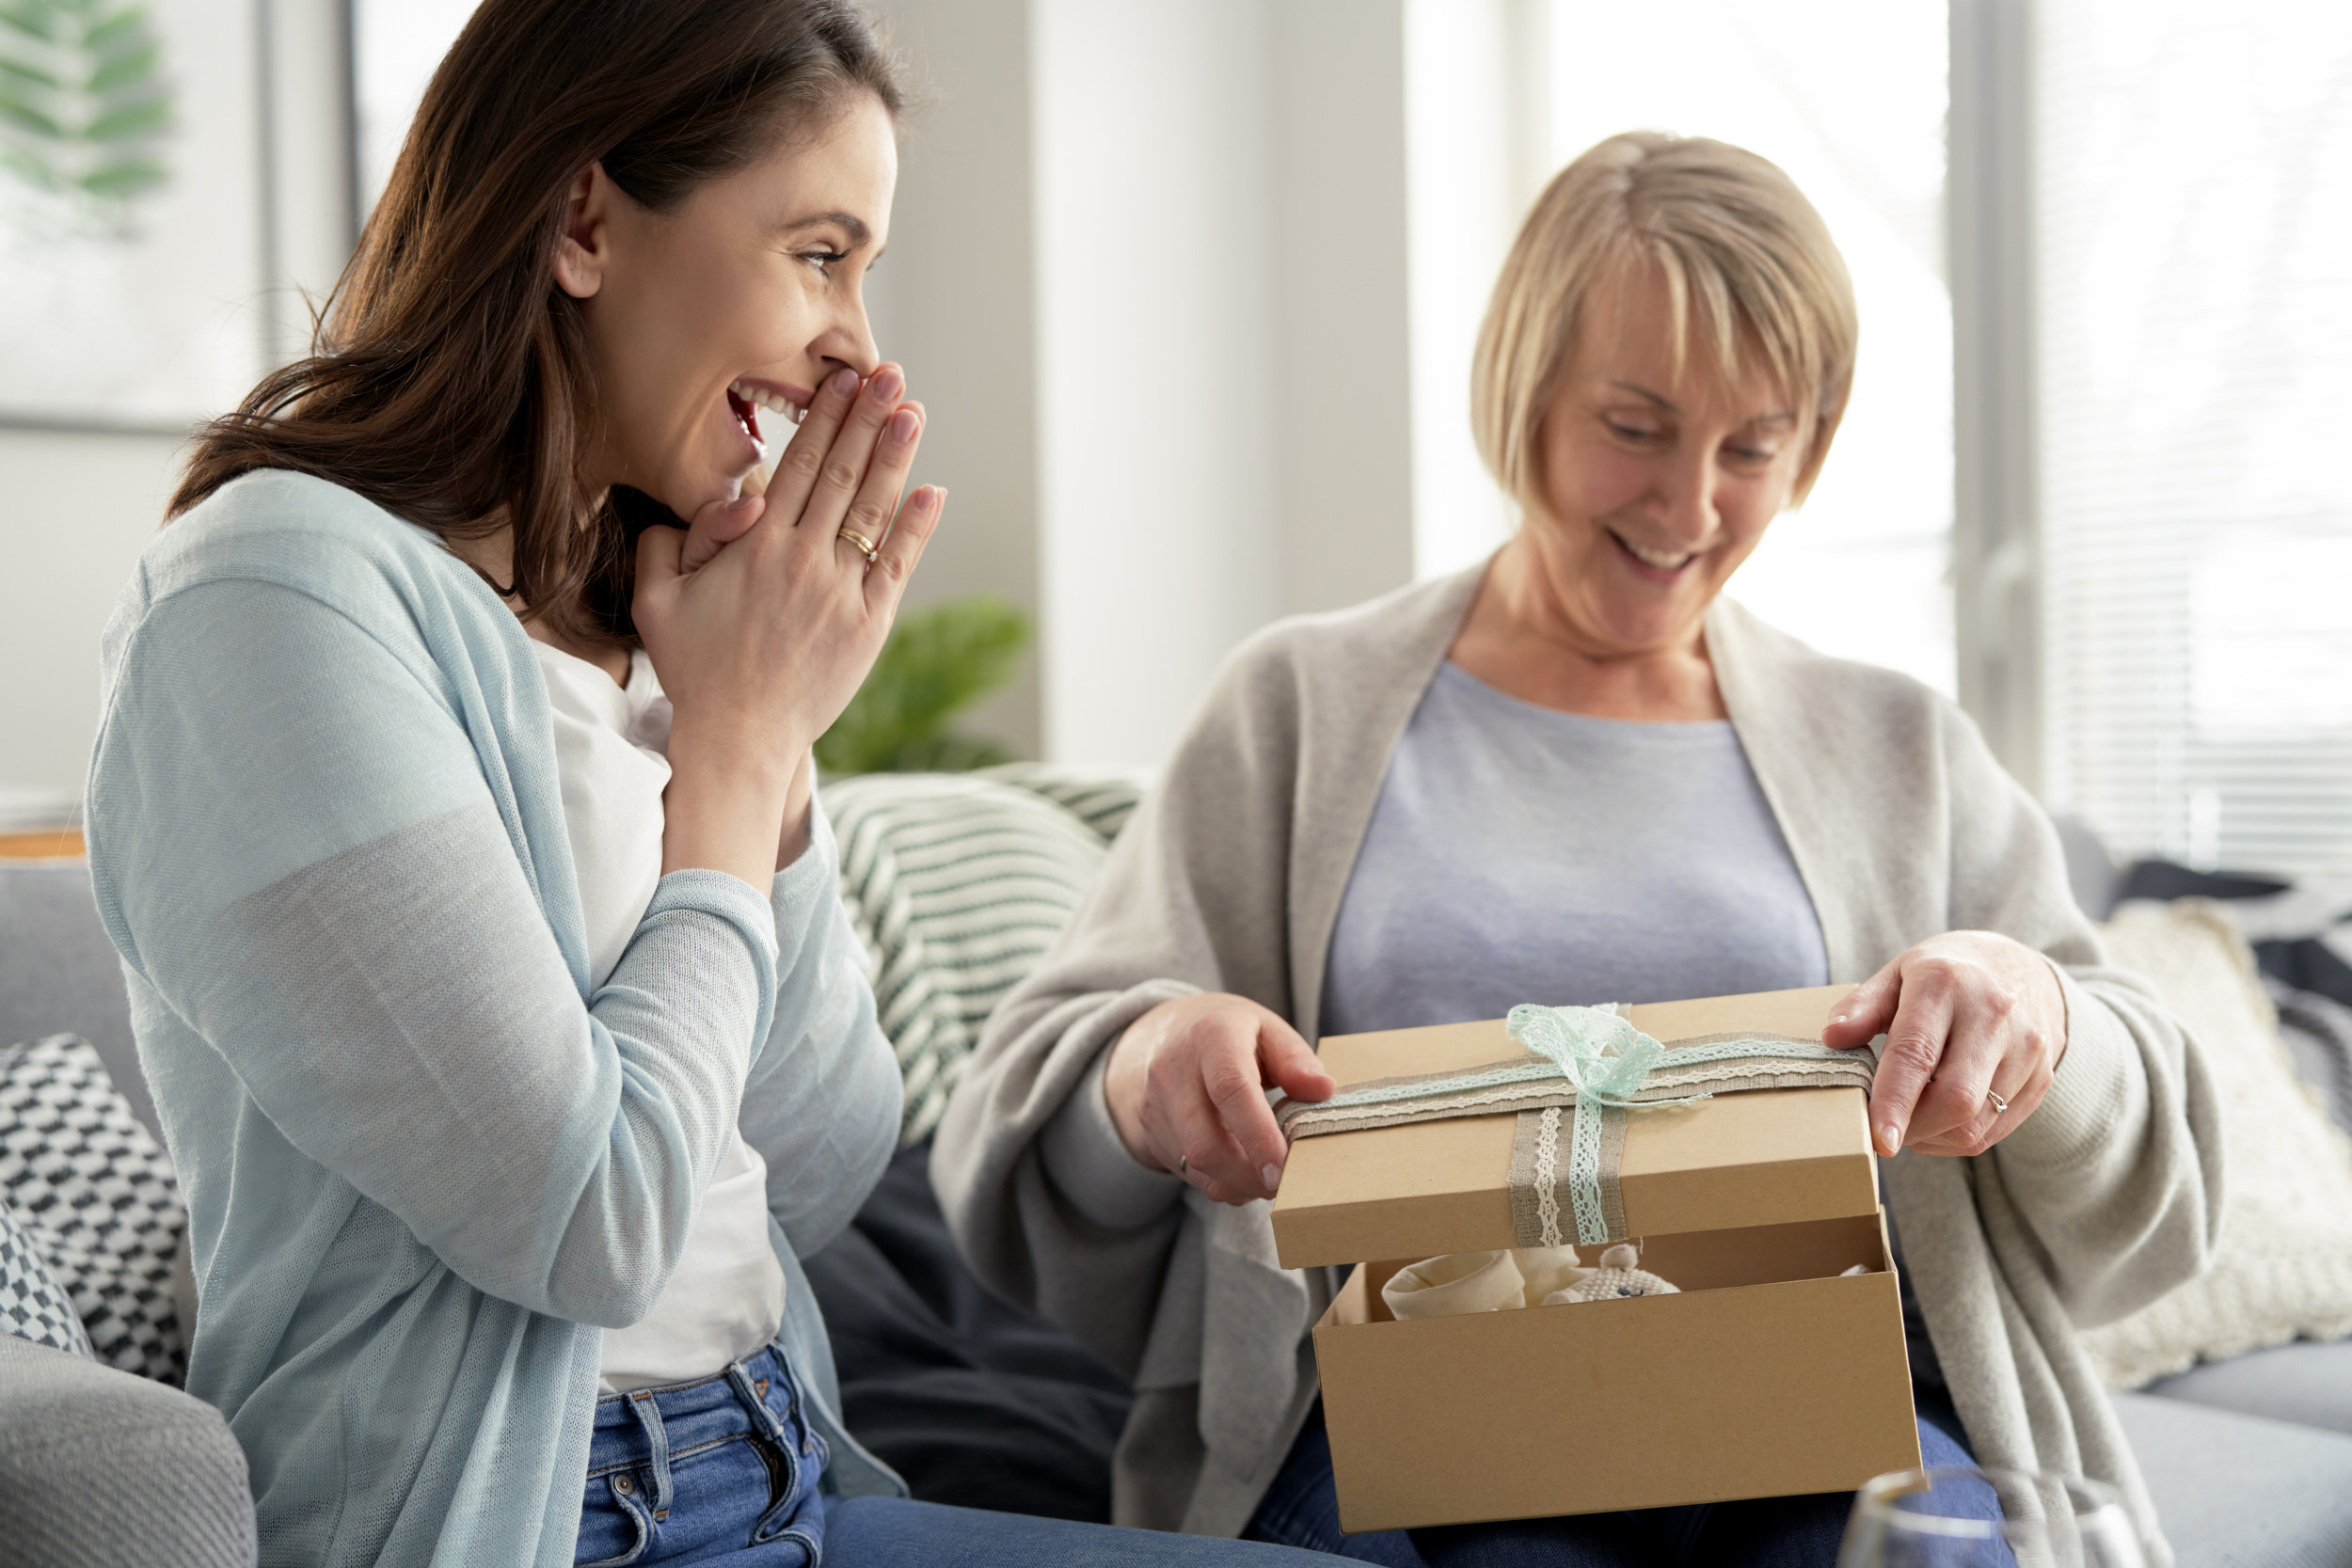 Mother-in-Law Demanding 'Specific' Christmas Gifts From Her Family